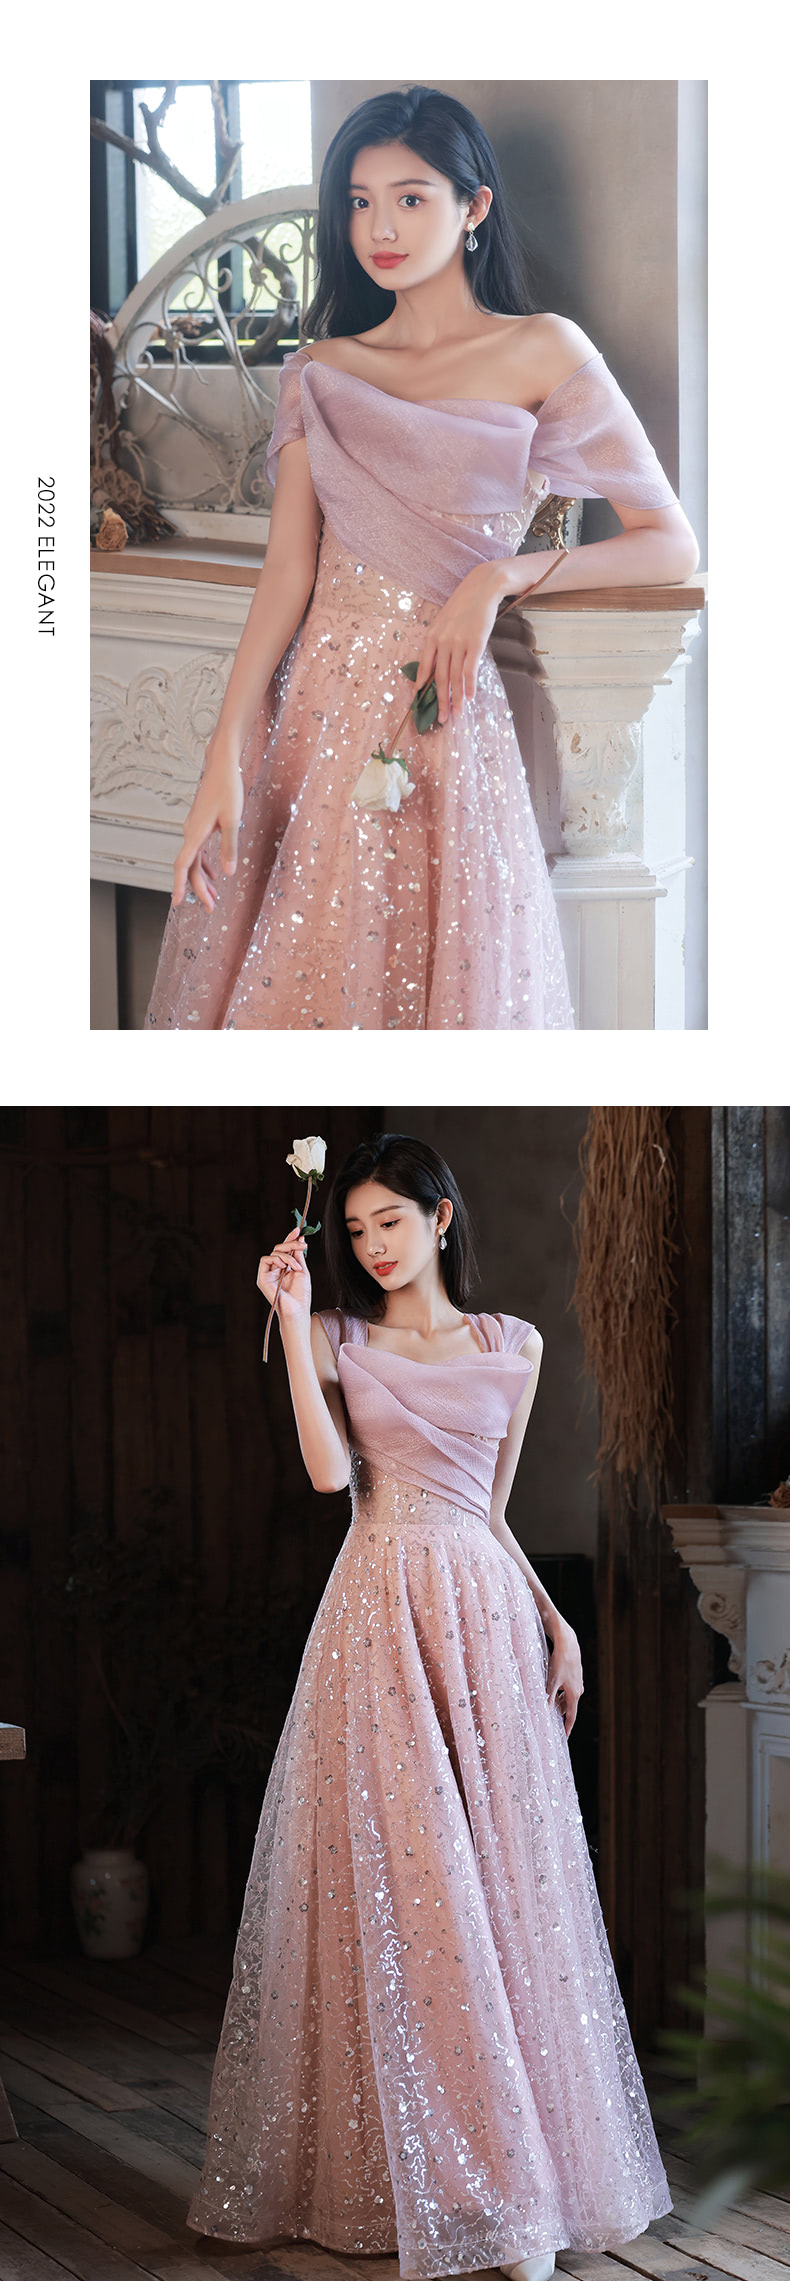 Aesthetic-Pink-Party-Dress-for-Teens-Girls-Ladies-Long-Formal-Outfit11.jpg